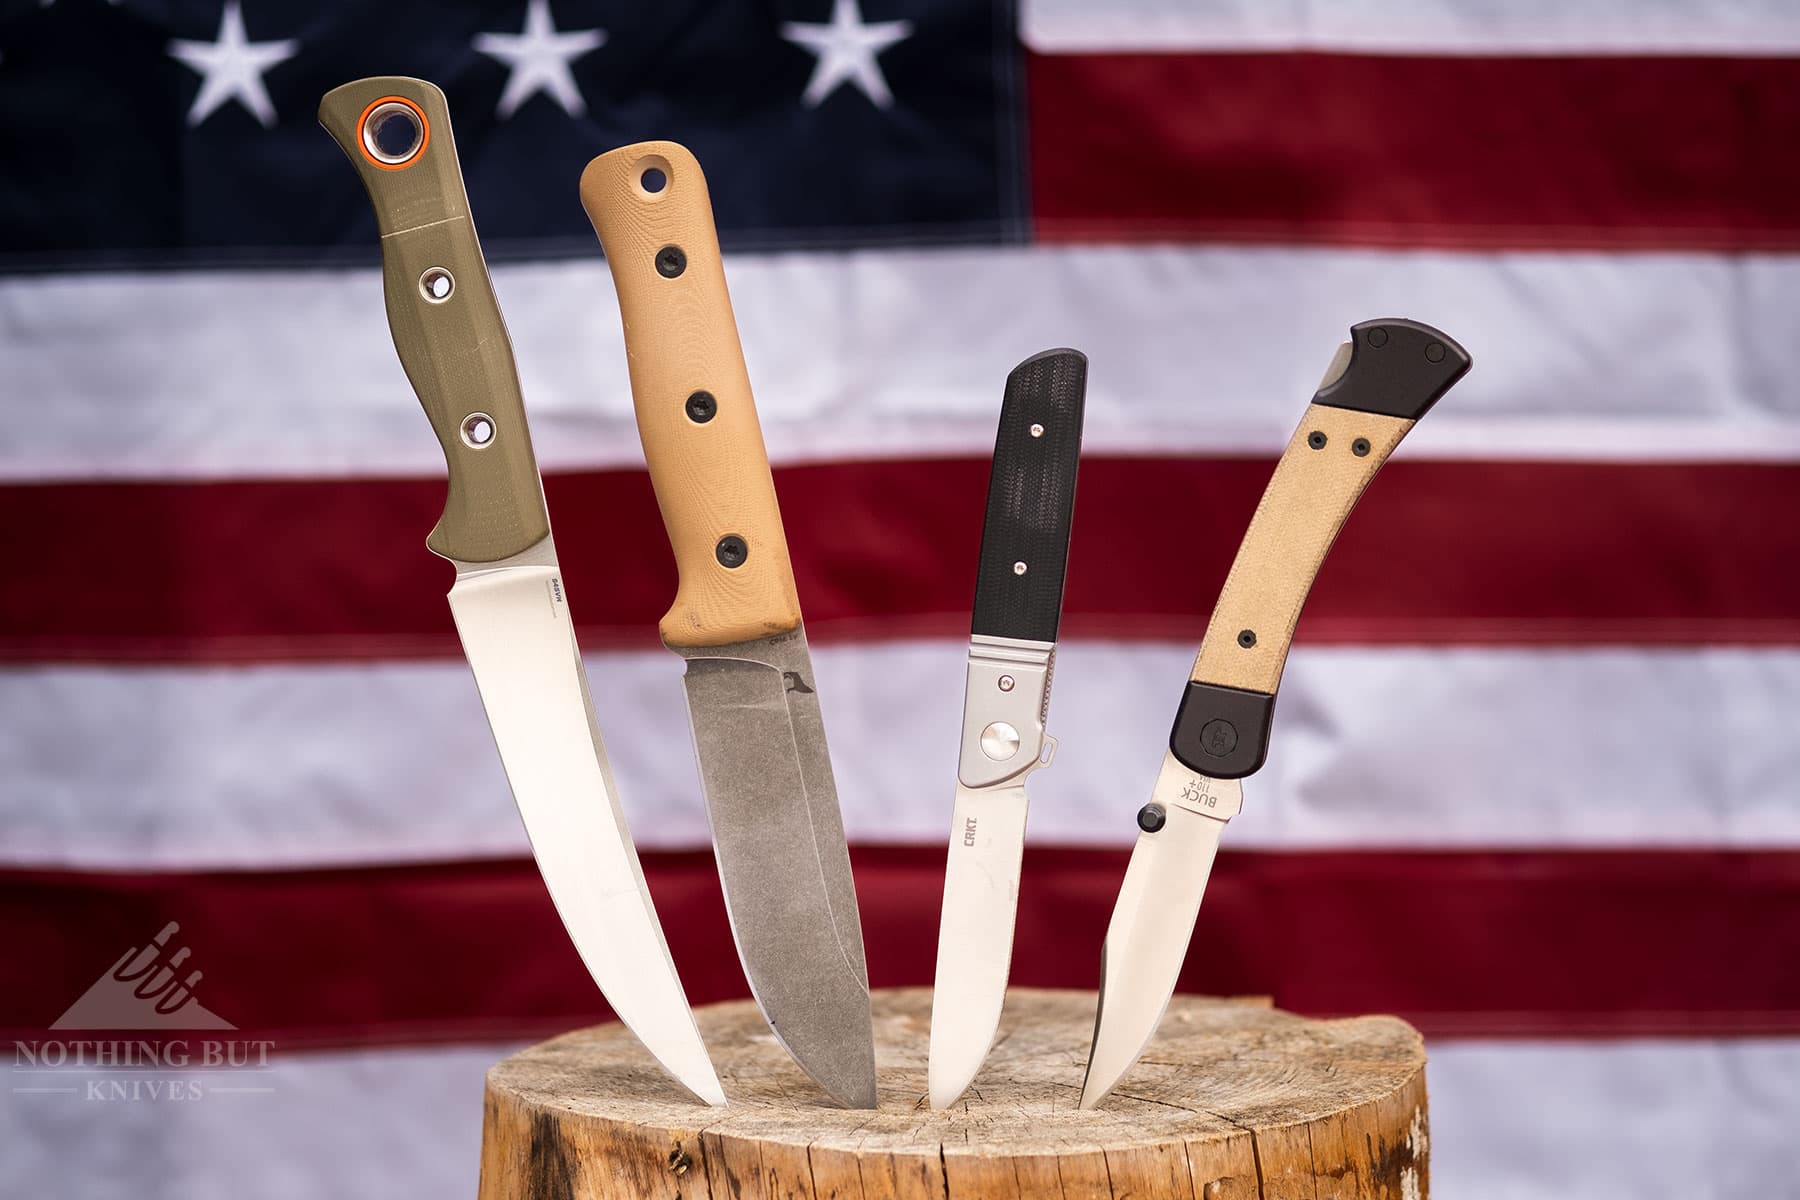 Four USA made knives sticking out of a log in front of an American flag.